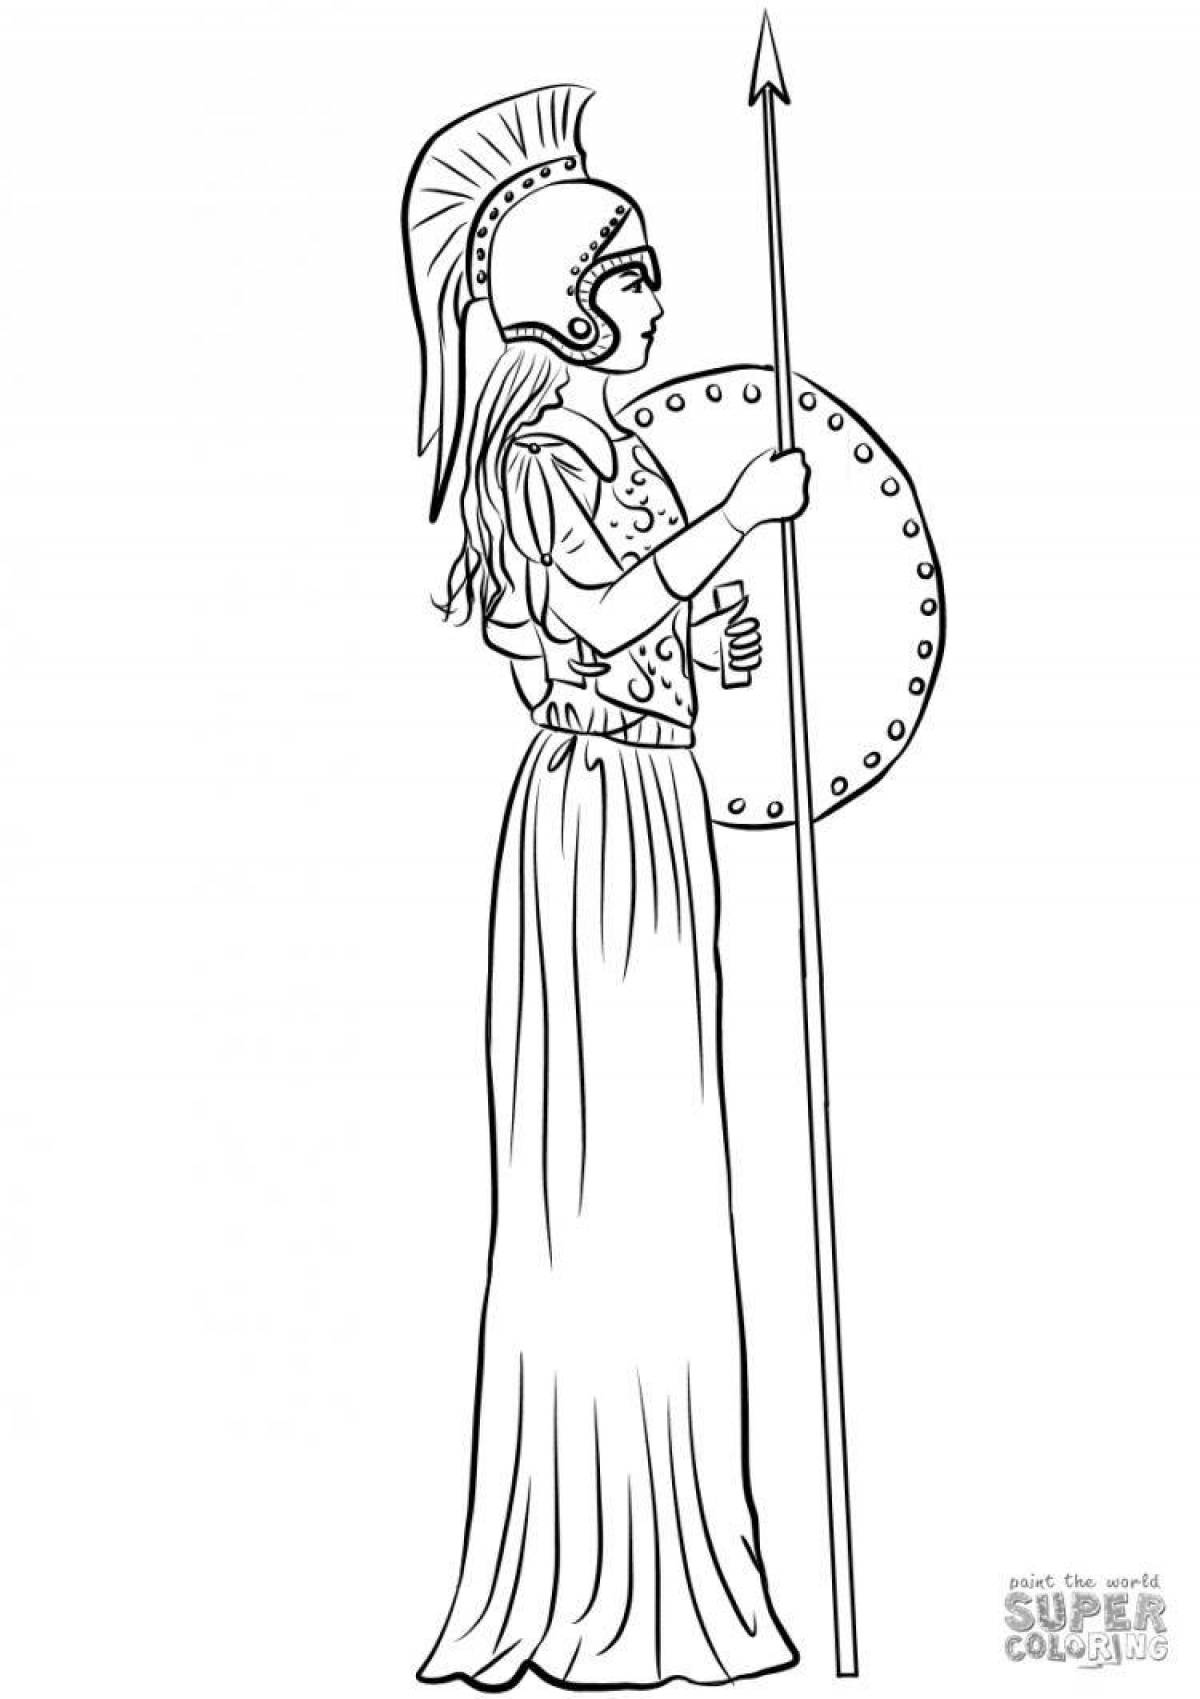 Athena's beautiful coloring page